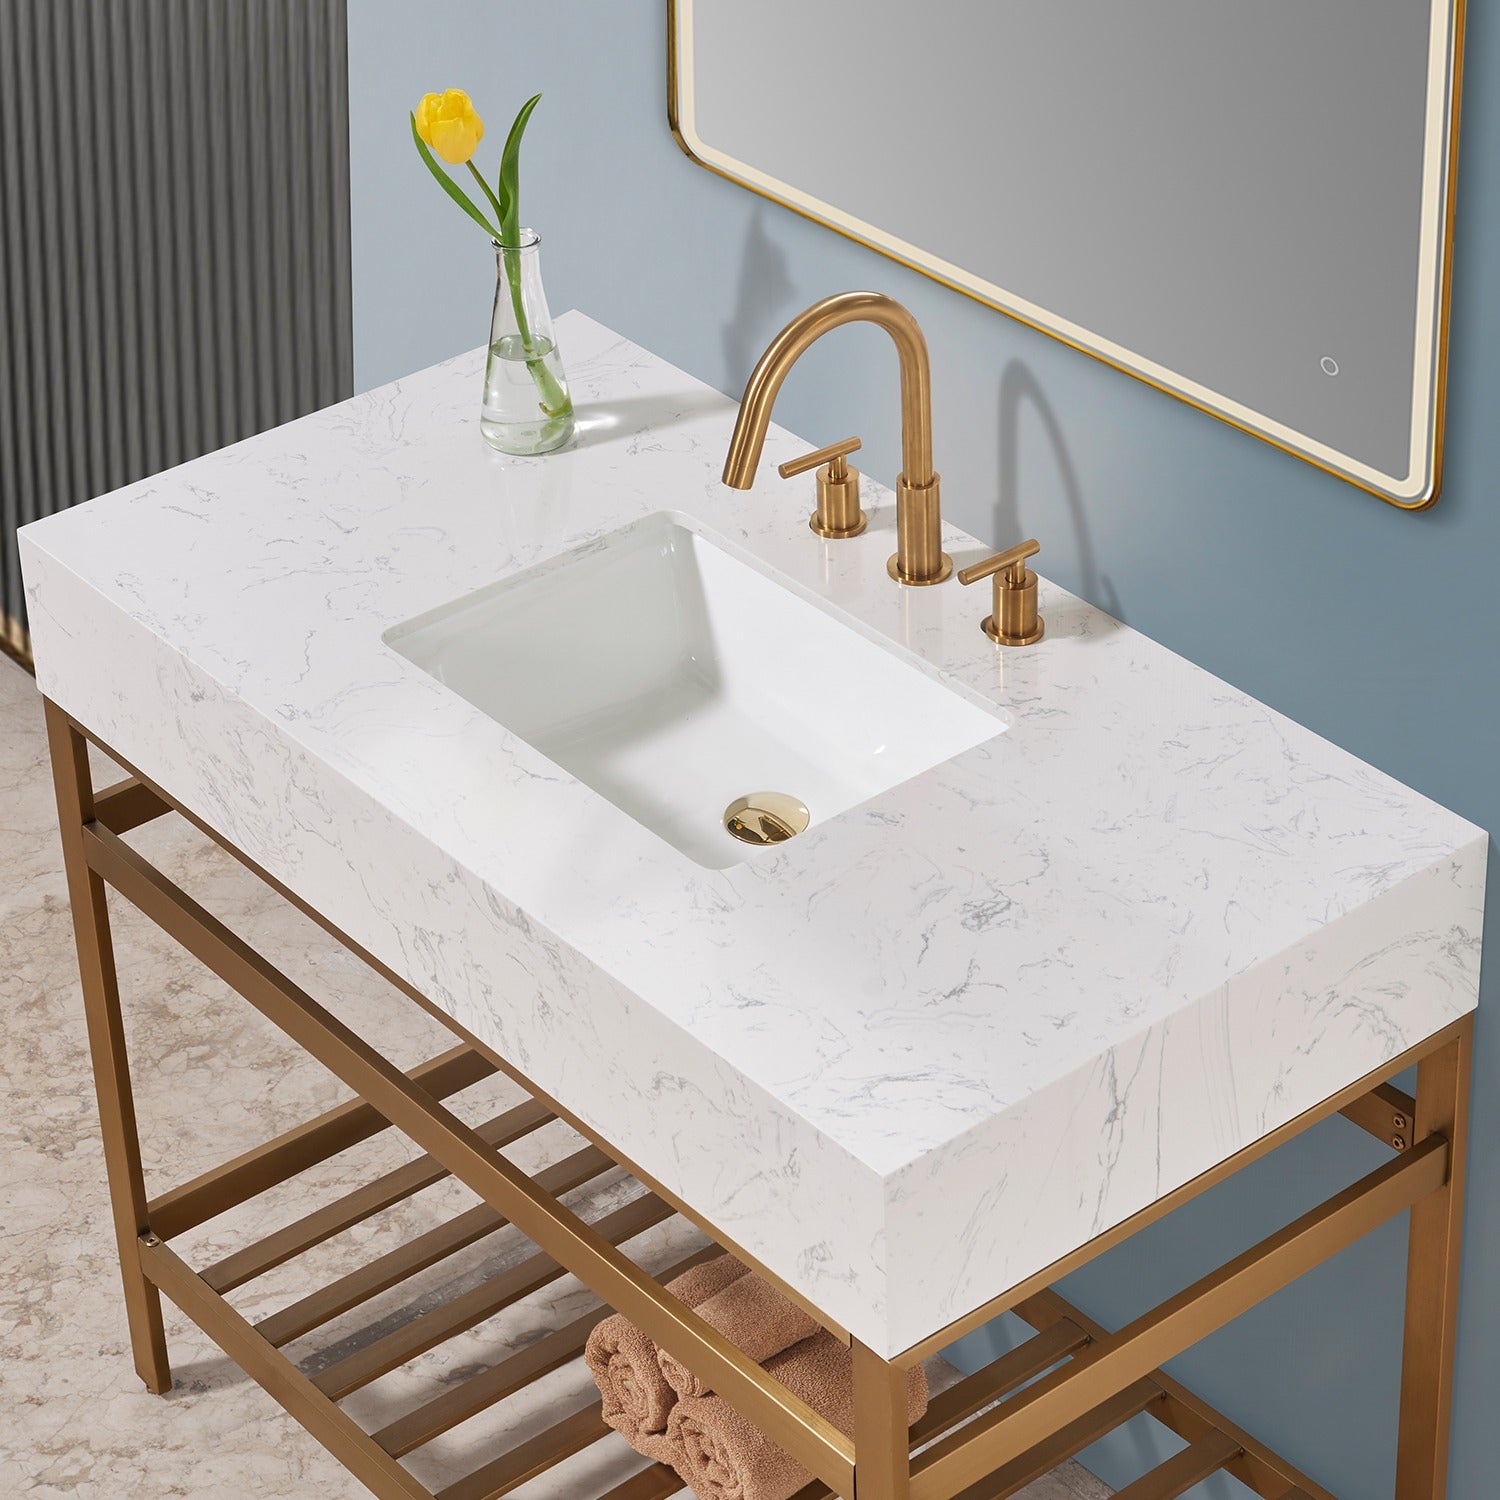 Merano 42" Single Stainless Steel Vanity Console with Aosta White Stone Countertop